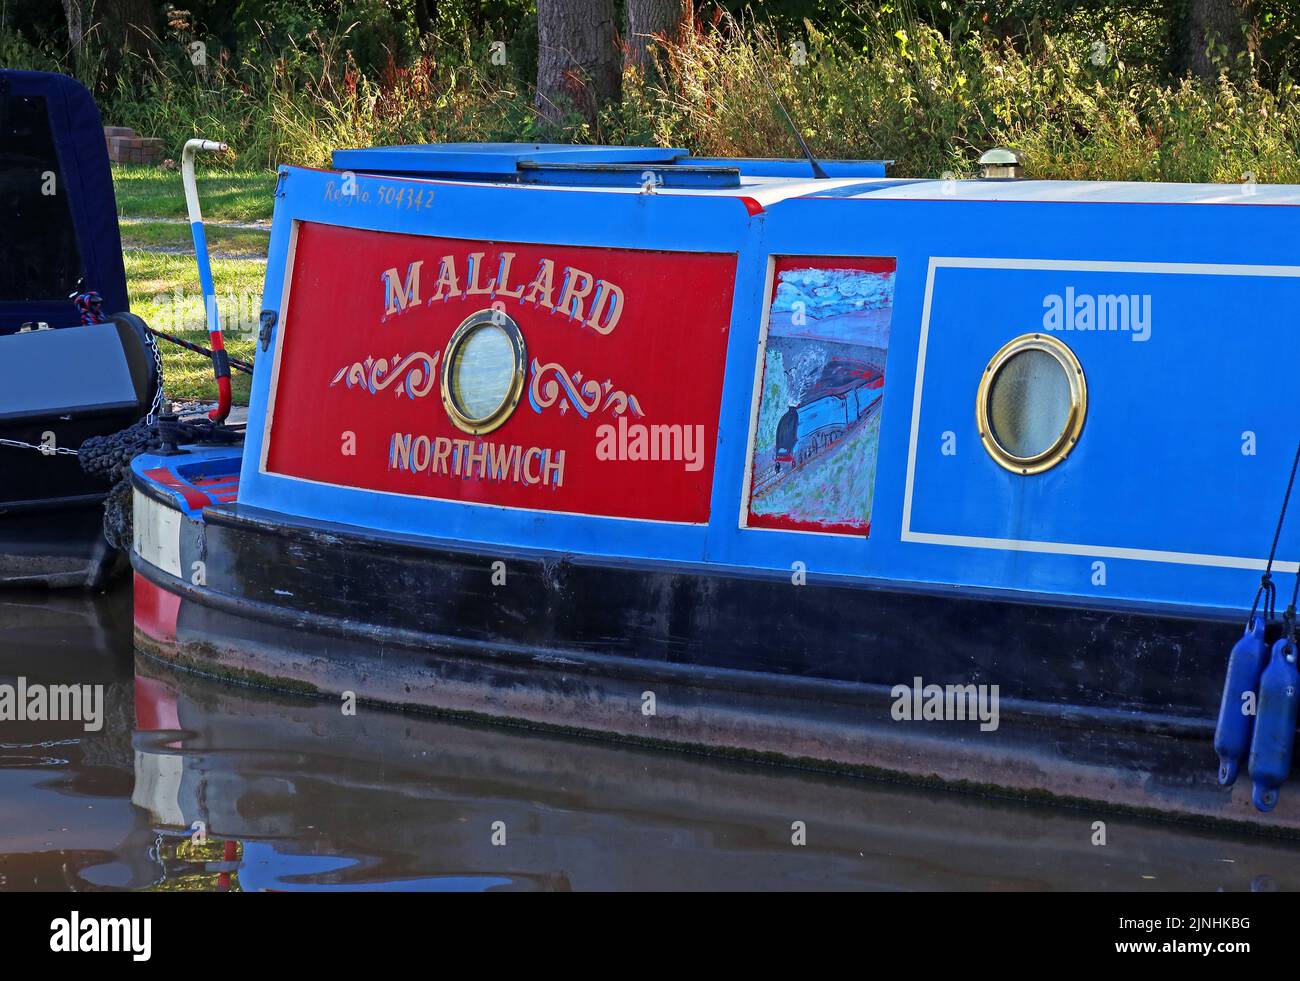 Mallard barge from Northwich, moored at Nantwich Marina, Basin End, Chester Road, Nantwich, Cheshire, England, CW5 8LB Stock Photo